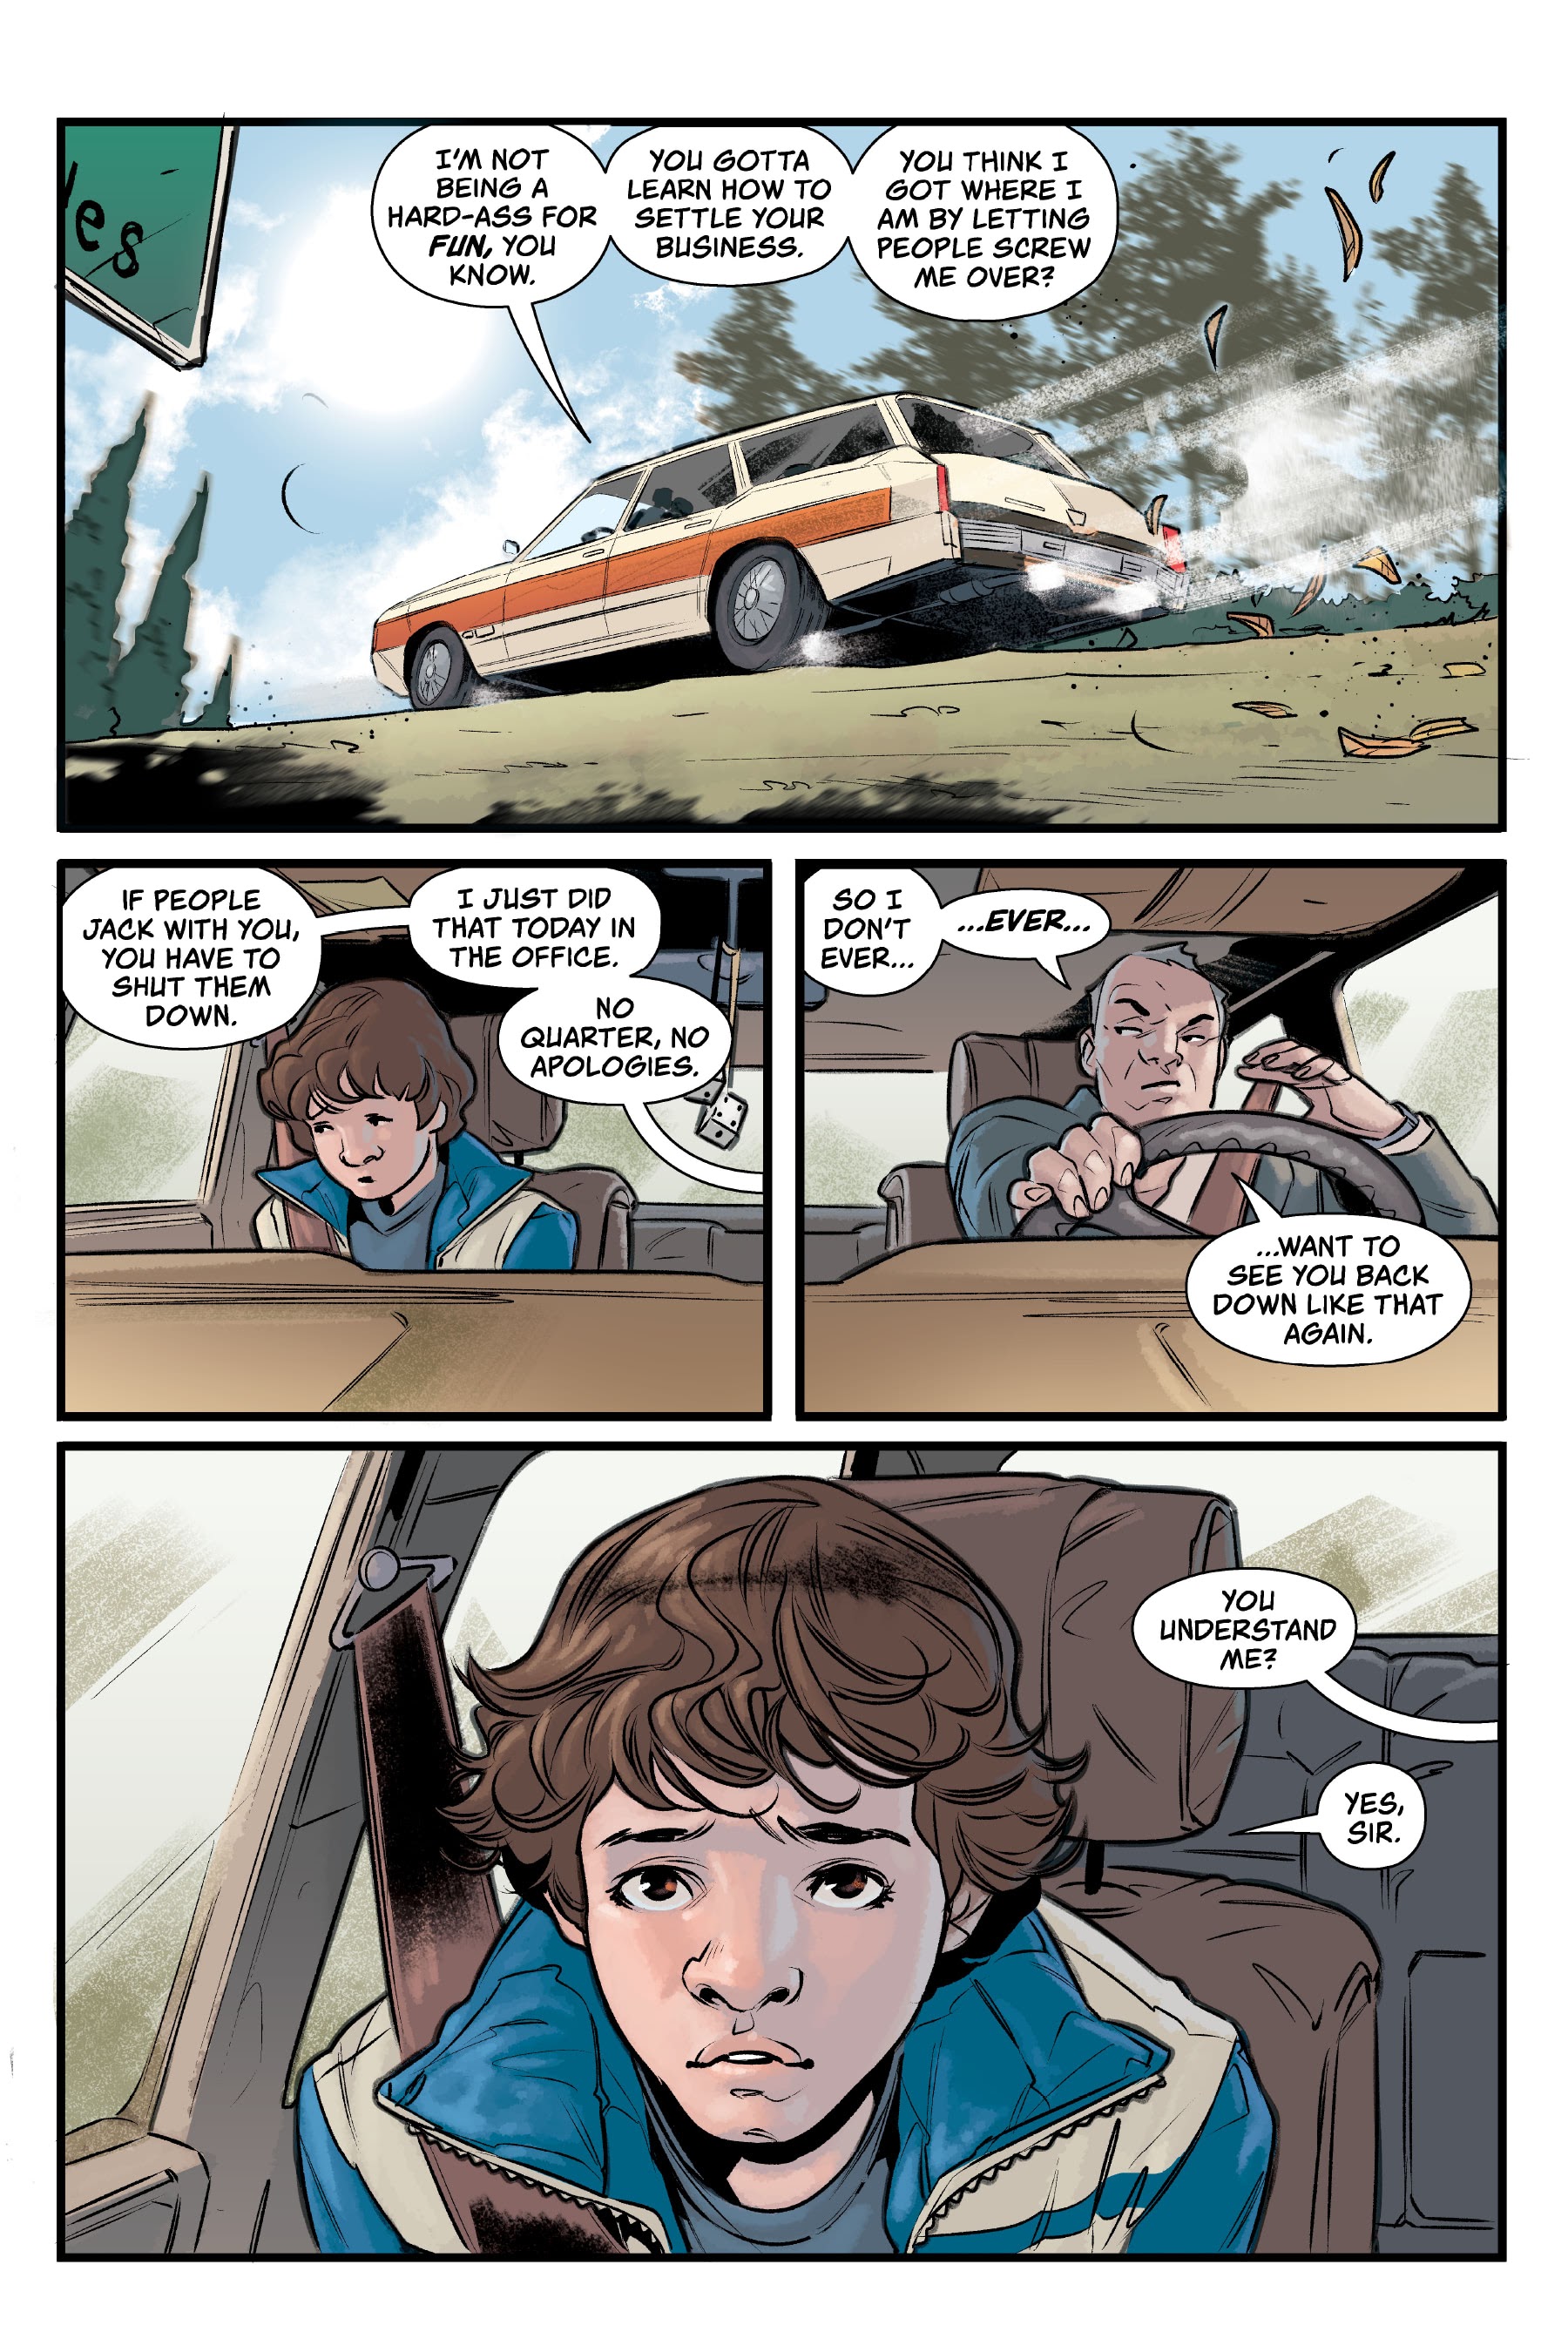 Read online Stranger Things: The Bully comic -  Issue # TPB - 24